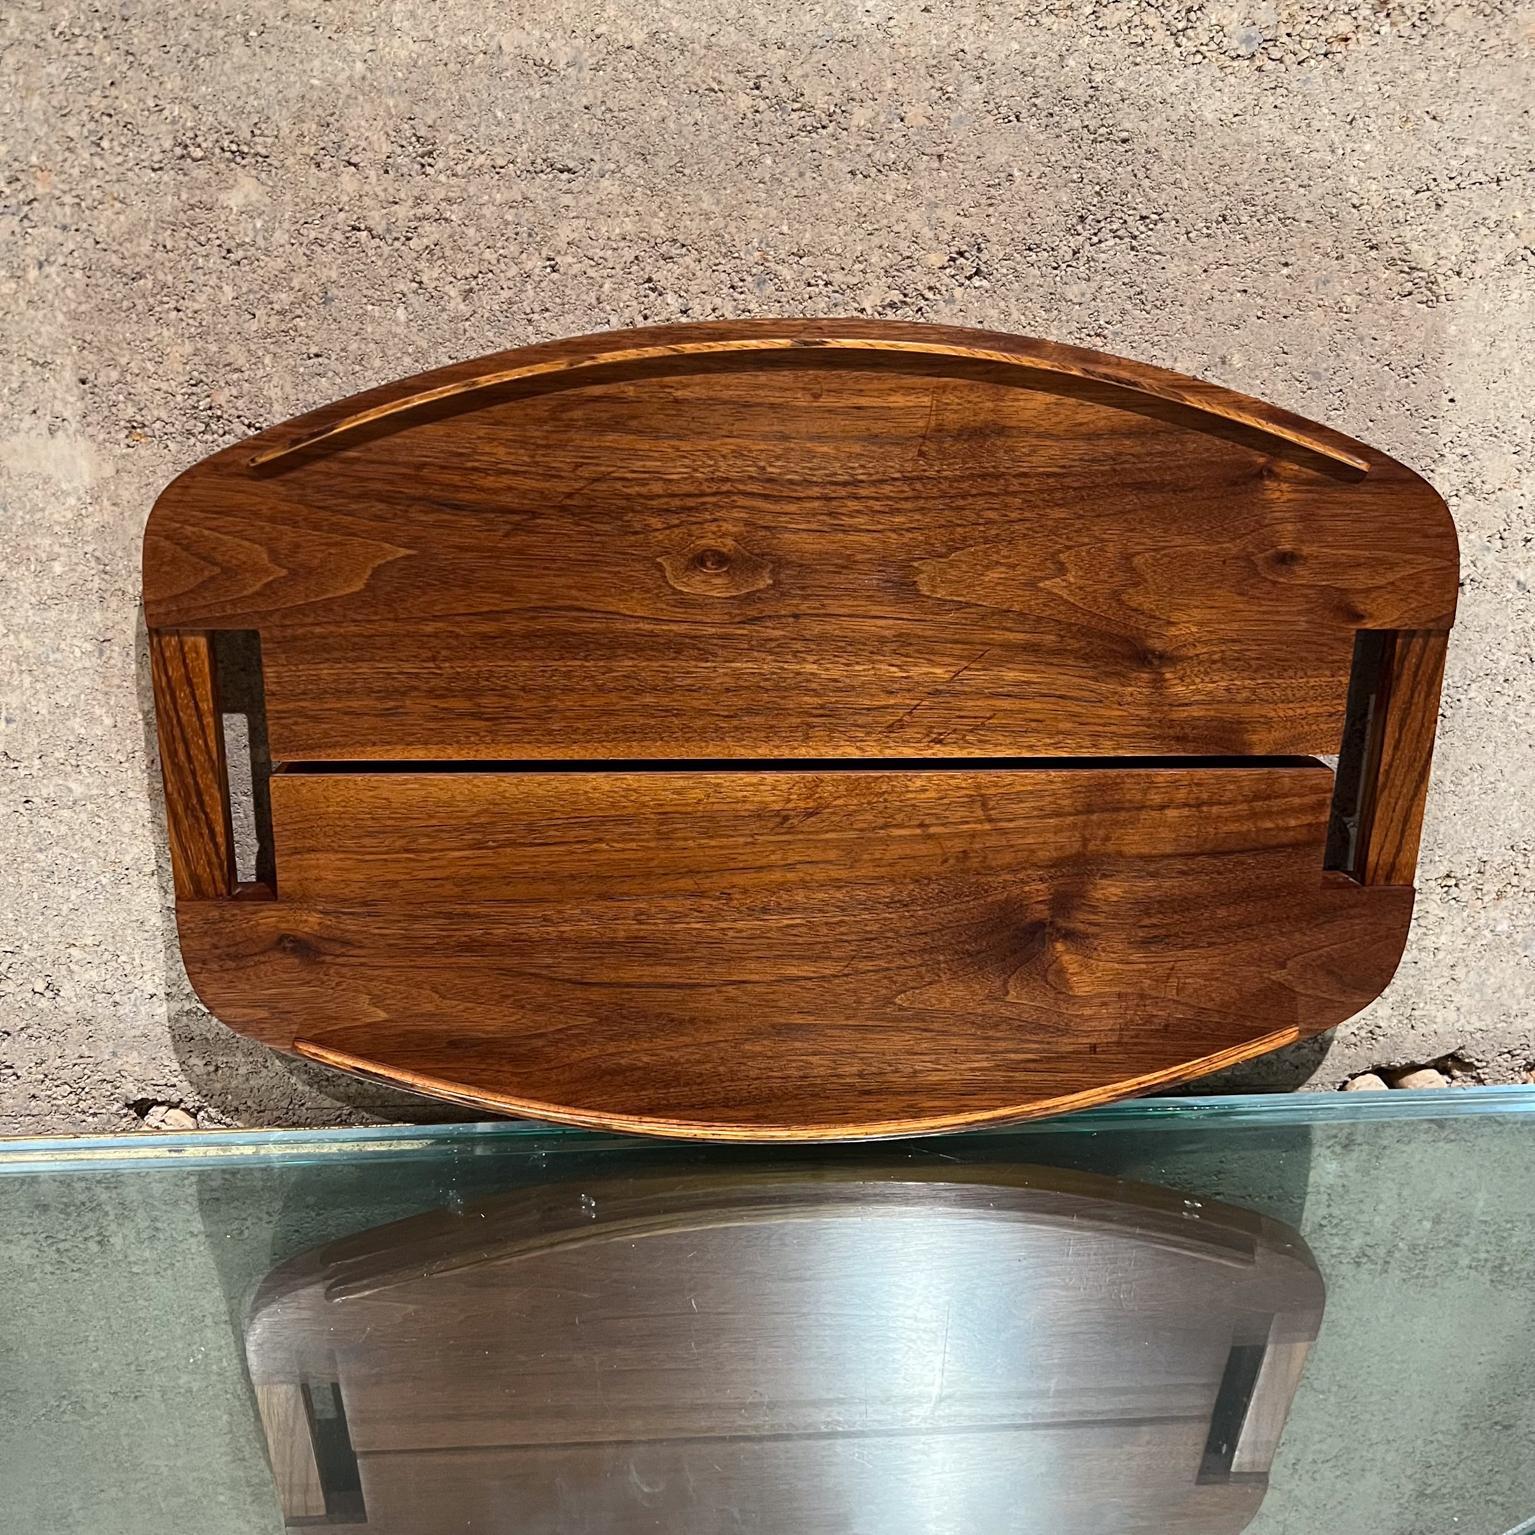 Modern Art Sculptural Walnut Wood Tray
12 d x 18 long x 1.13
Preowned original vintage condition
See all images for details.